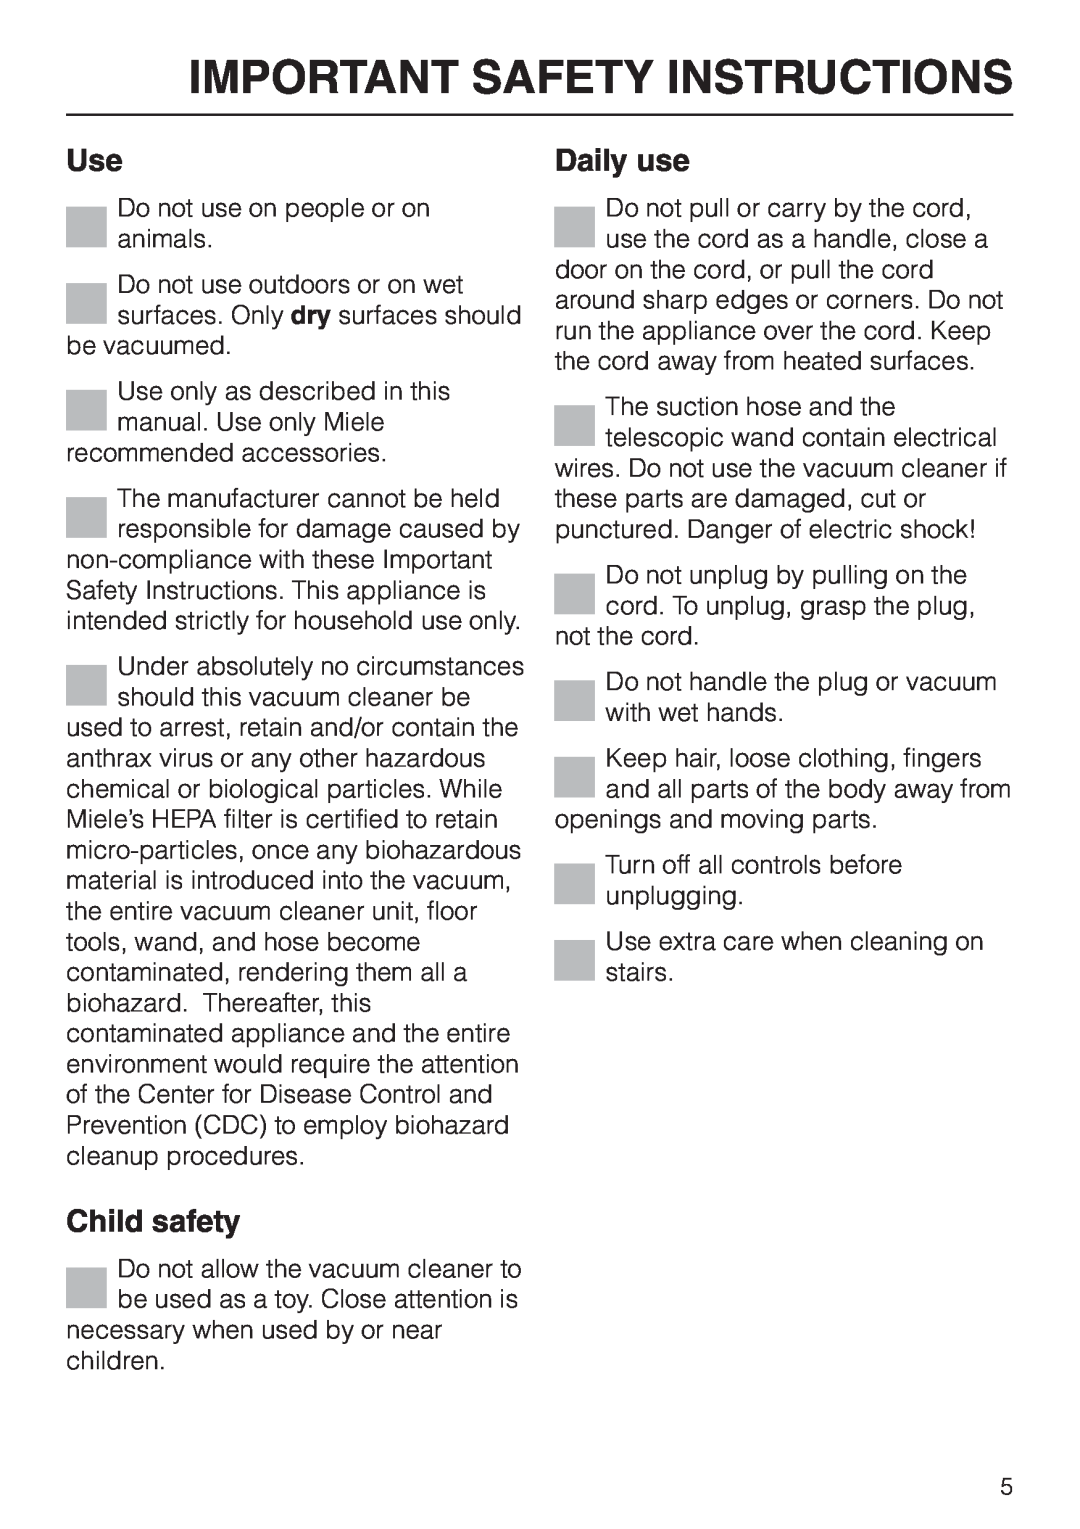 Miele S 558 manual Child safety, Daily use, Important Safety Instructions 